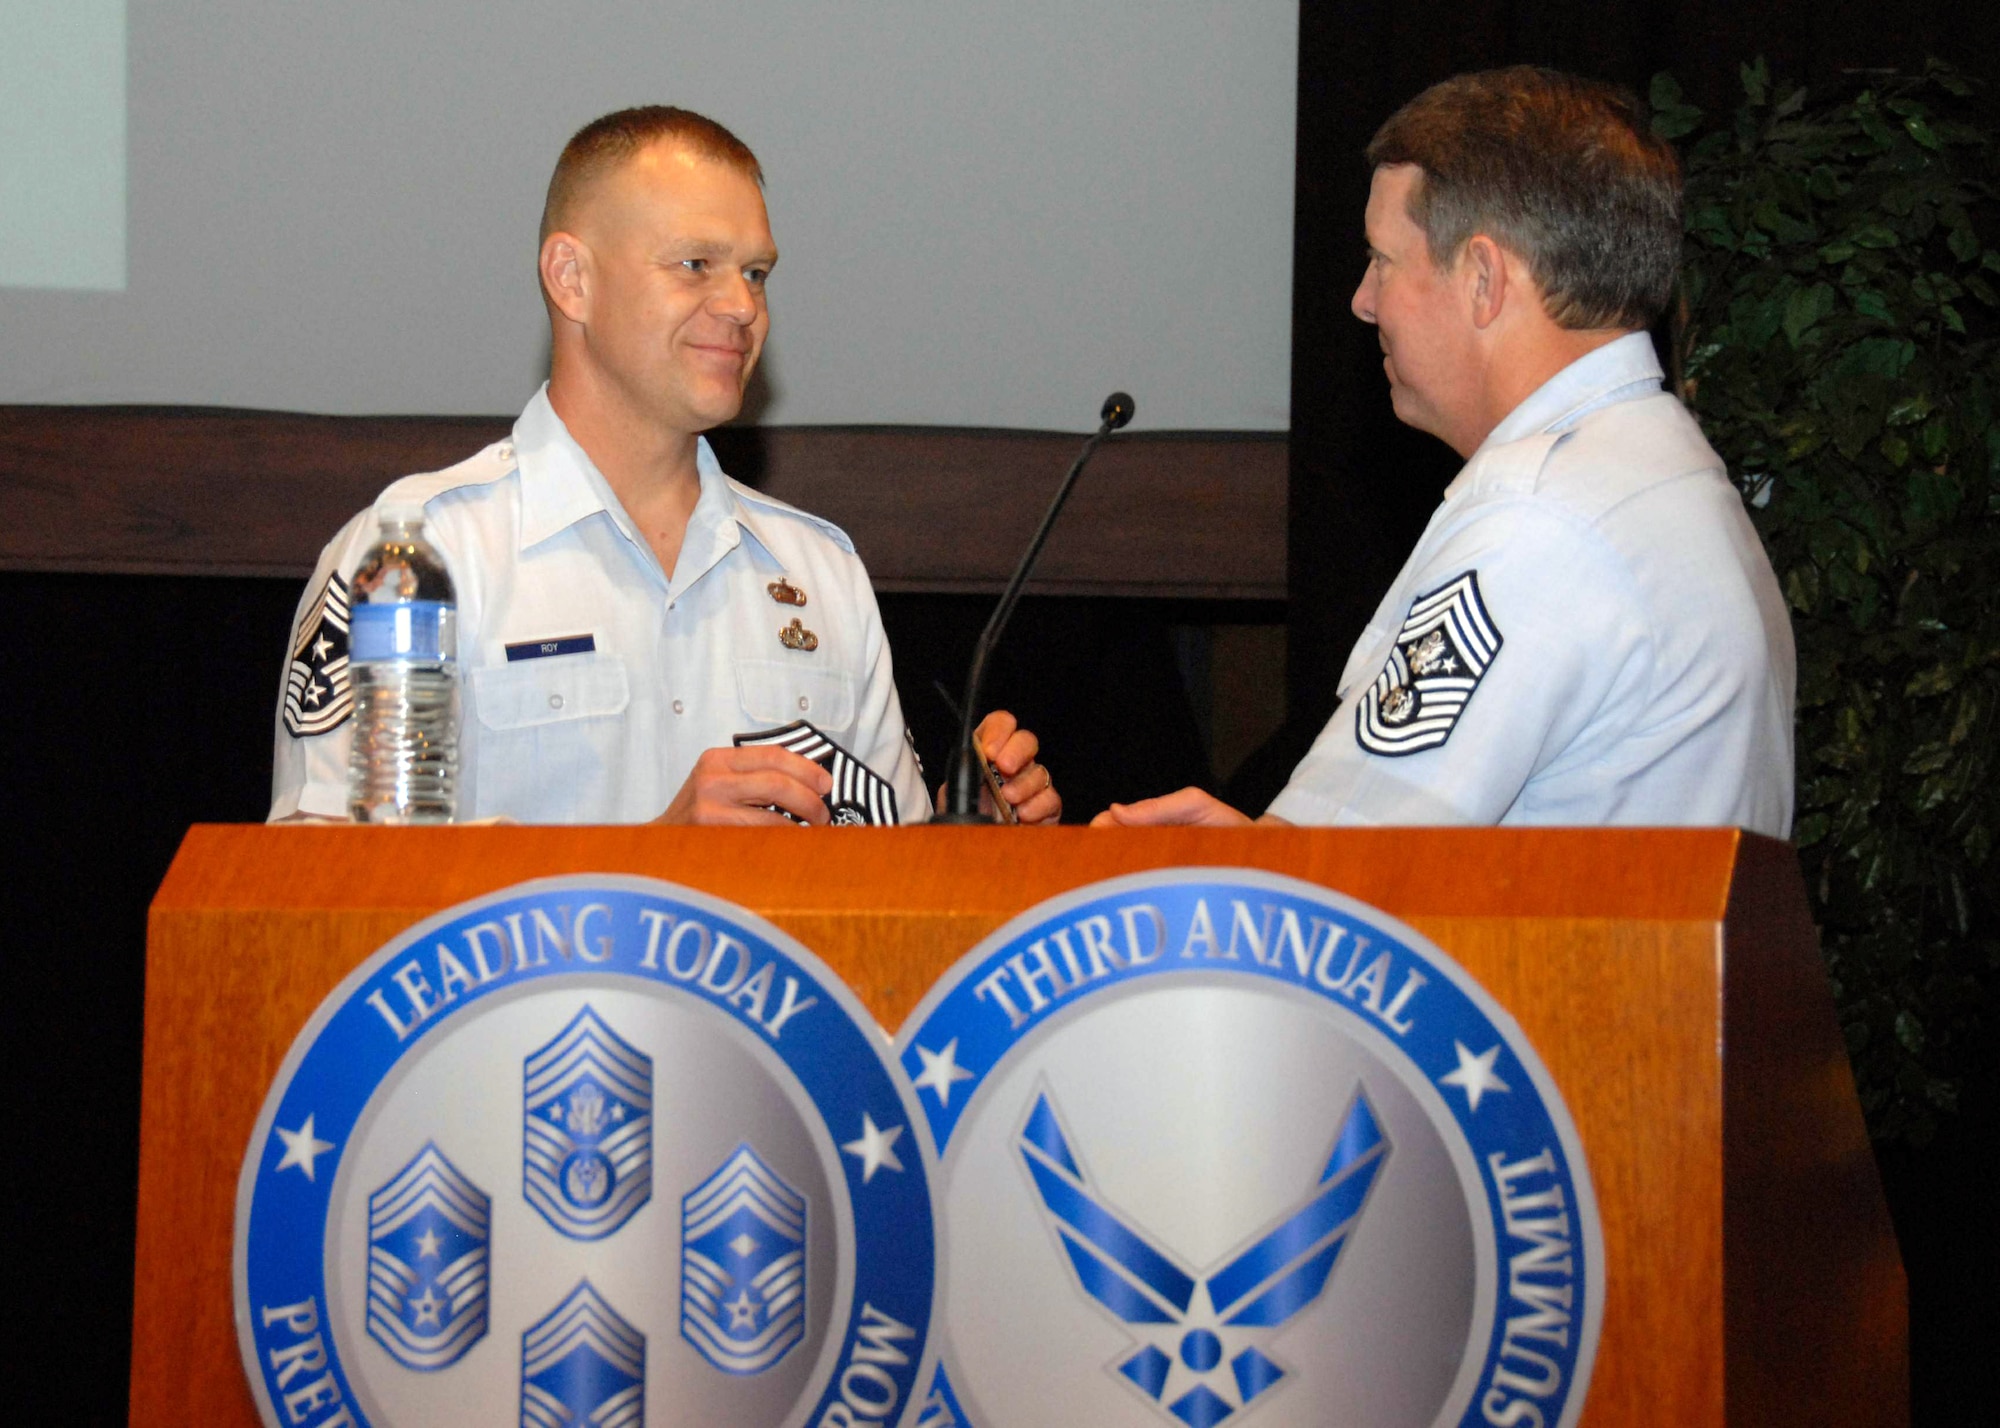 Chief Master Sgt. of the Air Force Rodney J. McKinley (right) introduces his replacement, Chief Master Sgt. James A. Roy, to attendees of the Senior Enlisted Forum May 8 at Maxwell Air Force Base, Ala.  Chief Roy, who currently is the senior enlisted advisor to the U.S. Pacific Command combatant commander, was selected by Air Force Chief of Staff Gen. Norton Schwartz to become the 16th Chief Master Sergeant of the Air Force.  He will assume his duties on June 30, following Chief McKinley's retirement.  (U.S. Air Force photo)